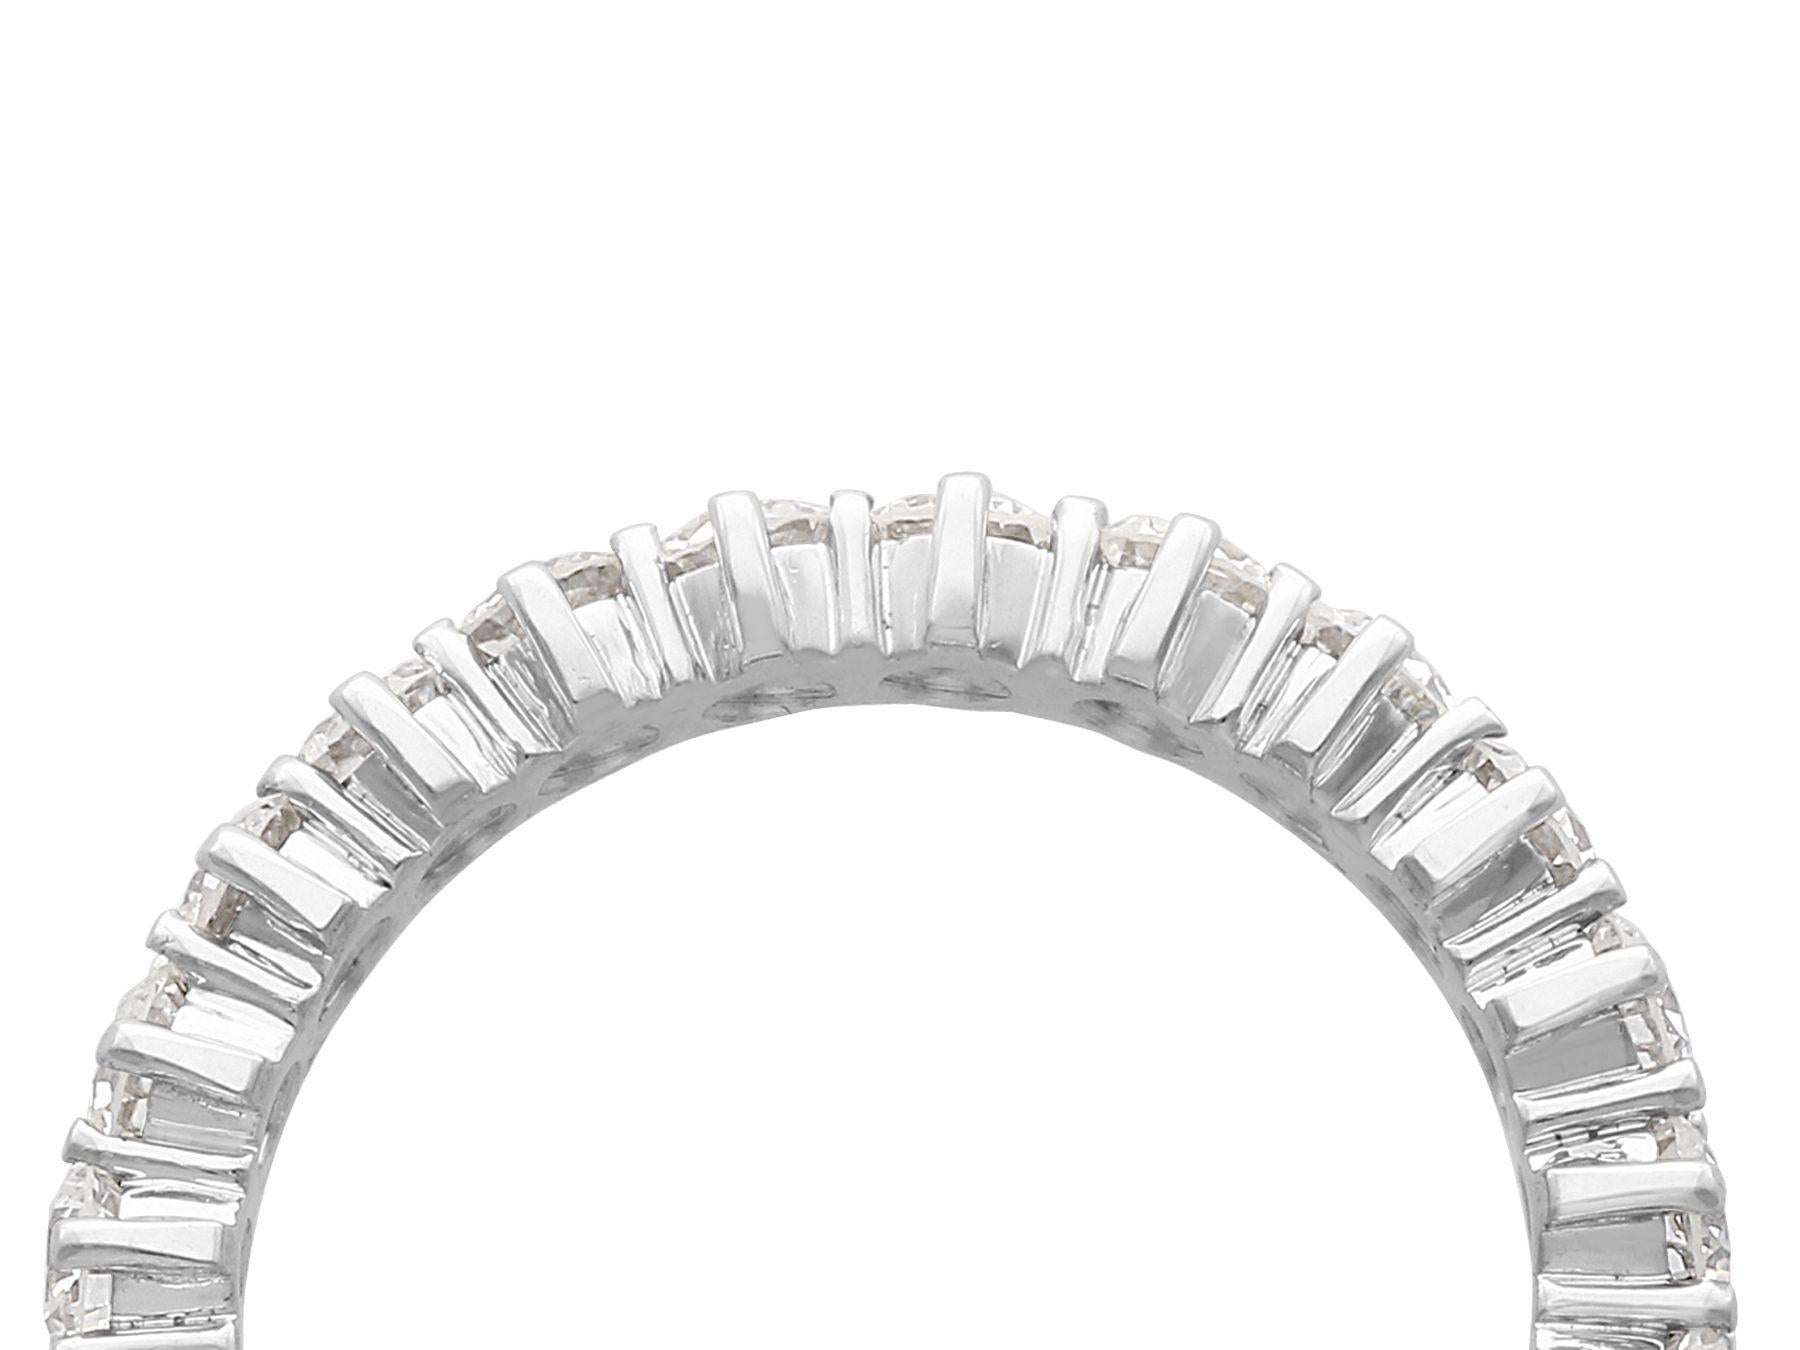 A stunning, fine and impressive 2.42 carat diamond and 18 karat white gold full eternity ring; part of our vintage jewelry and estate jewelry collections.

This stunning, fine and impressive vintage eternity ring has been crafted in 18k white